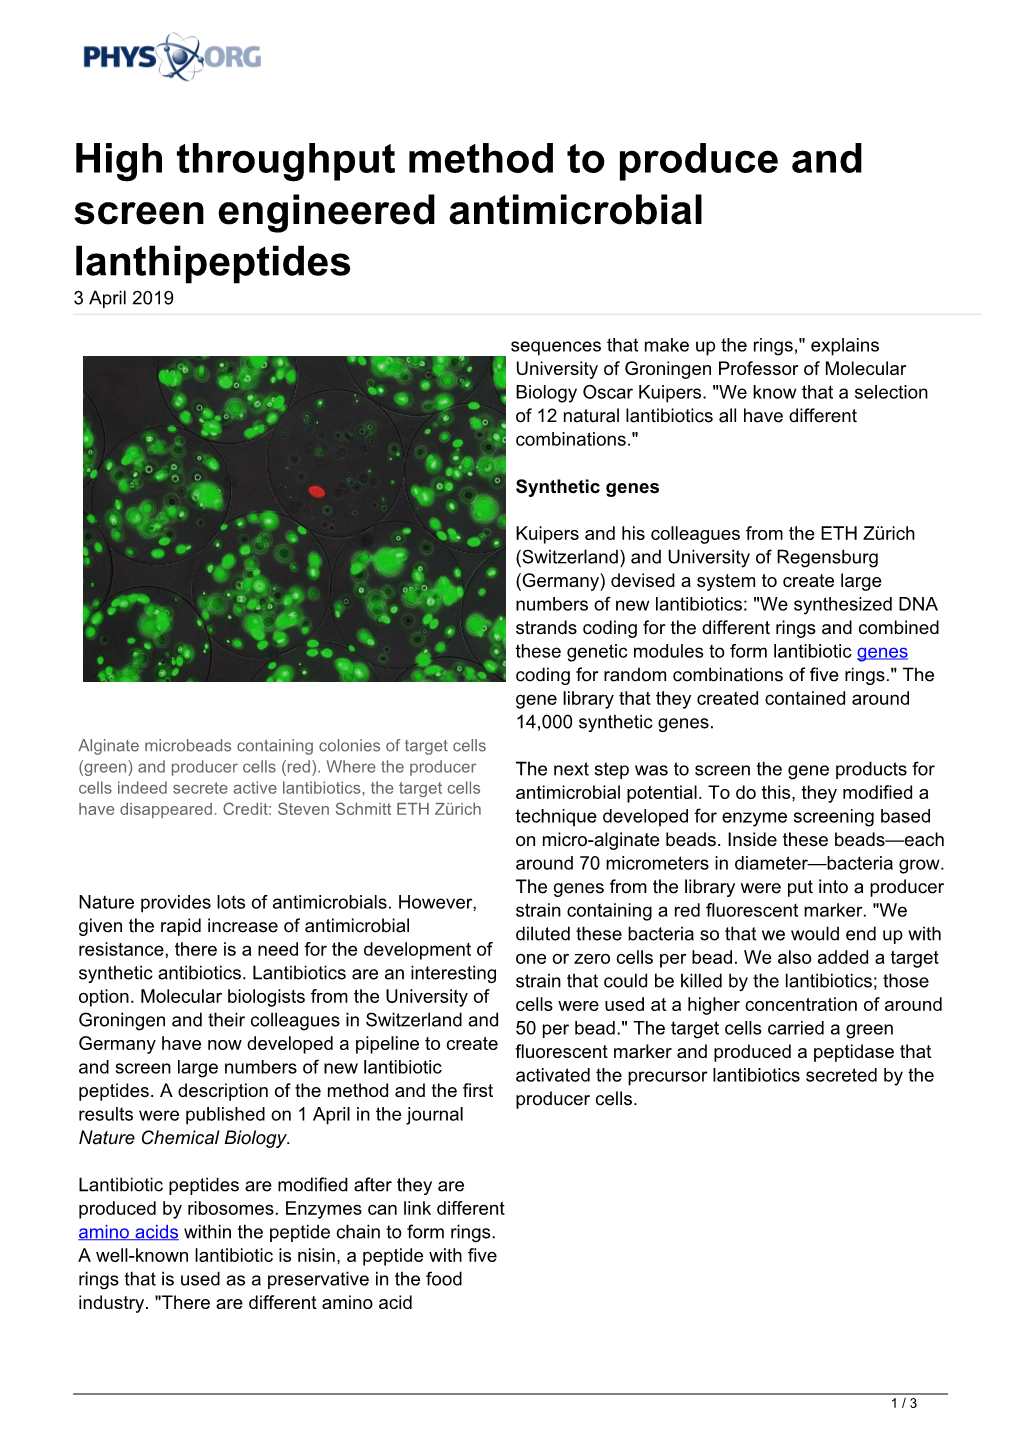 High Throughput Method to Produce and Screen Engineered Antimicrobial Lanthipeptides 3 April 2019